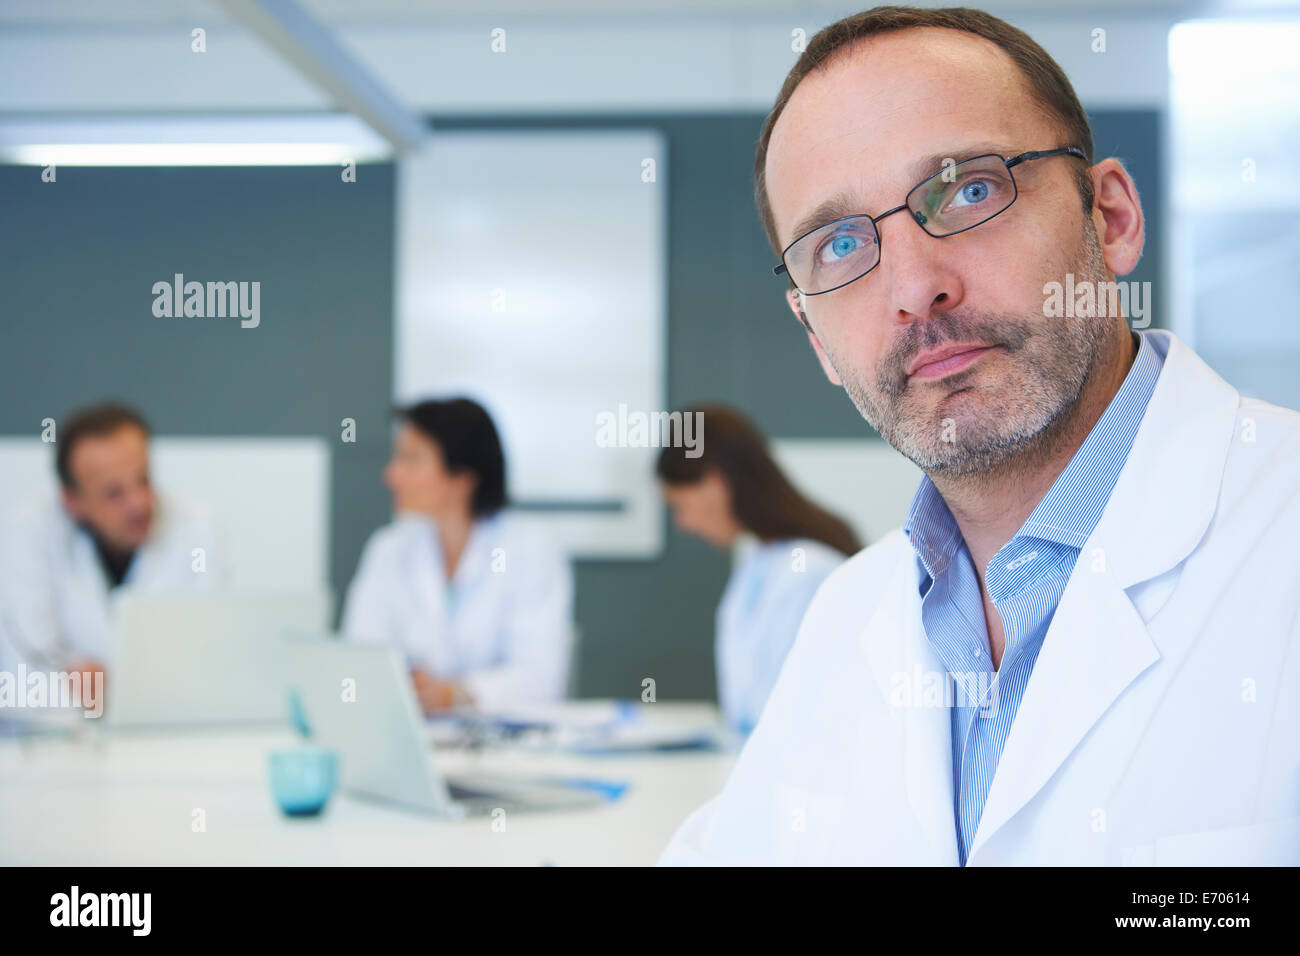 Portrait of male doctor, colleagues having discussion behind Stock Photo